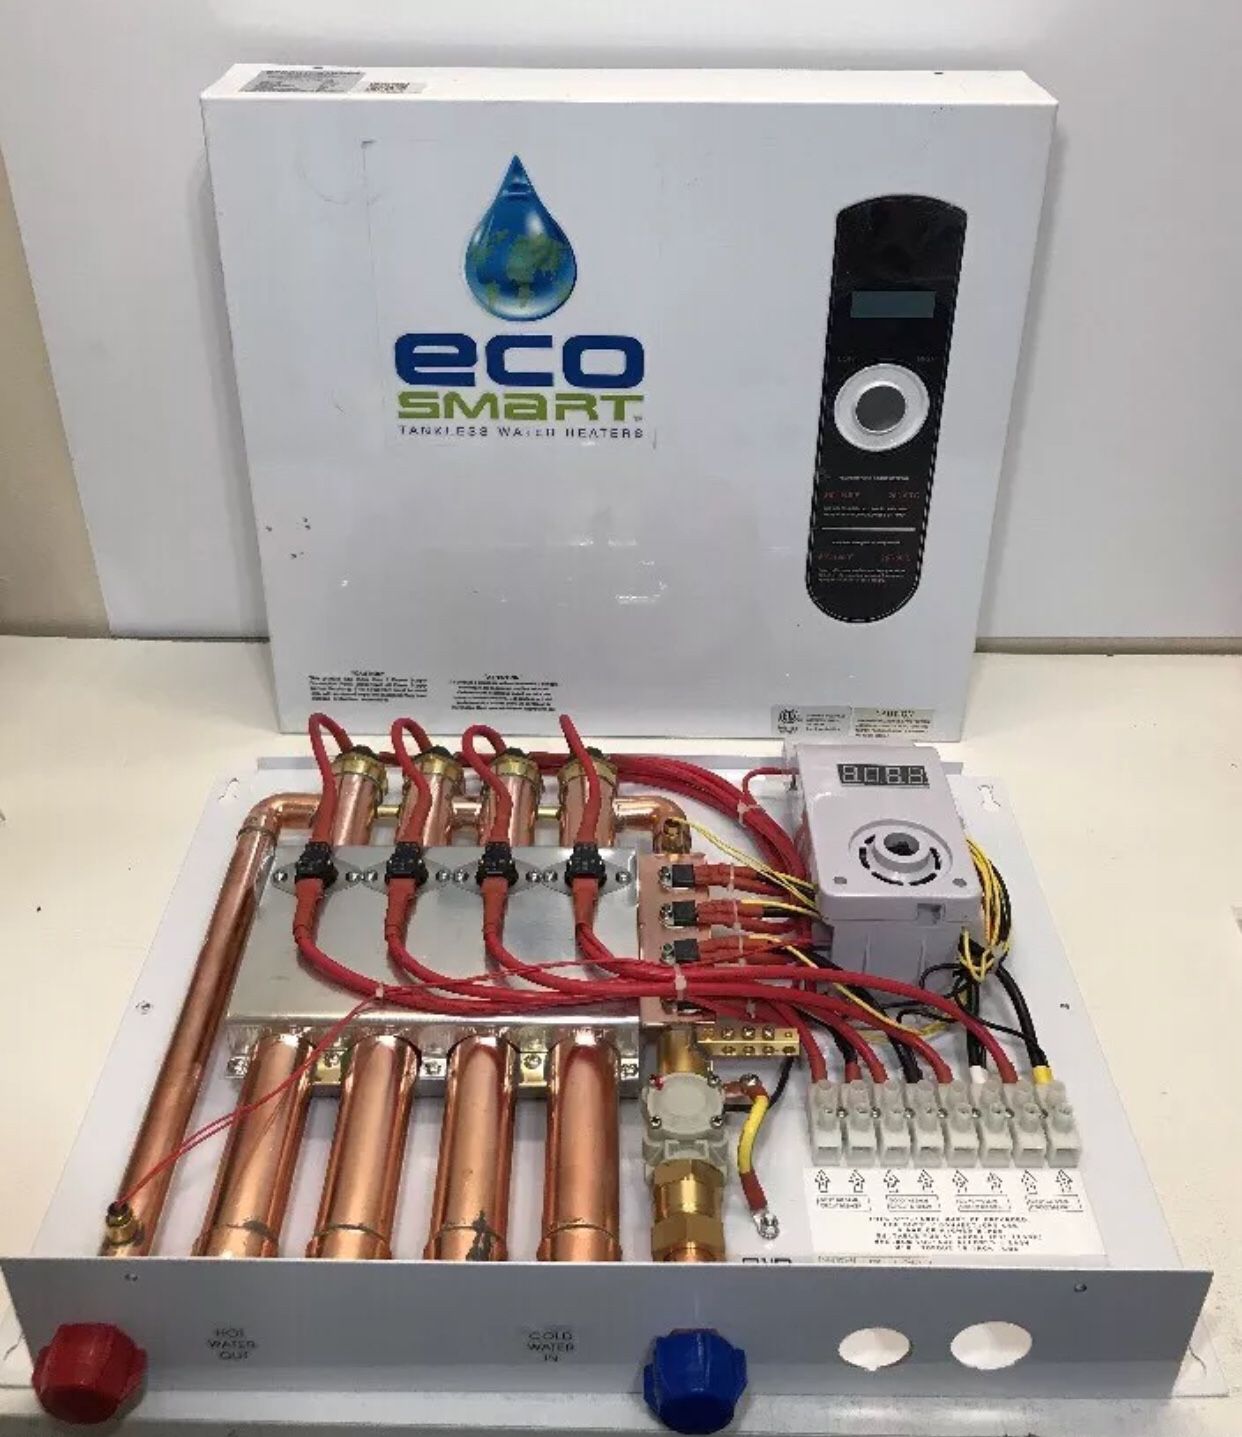 EcoSmart Offers Tankless Electric Water Heaters for All Green Home Sizes